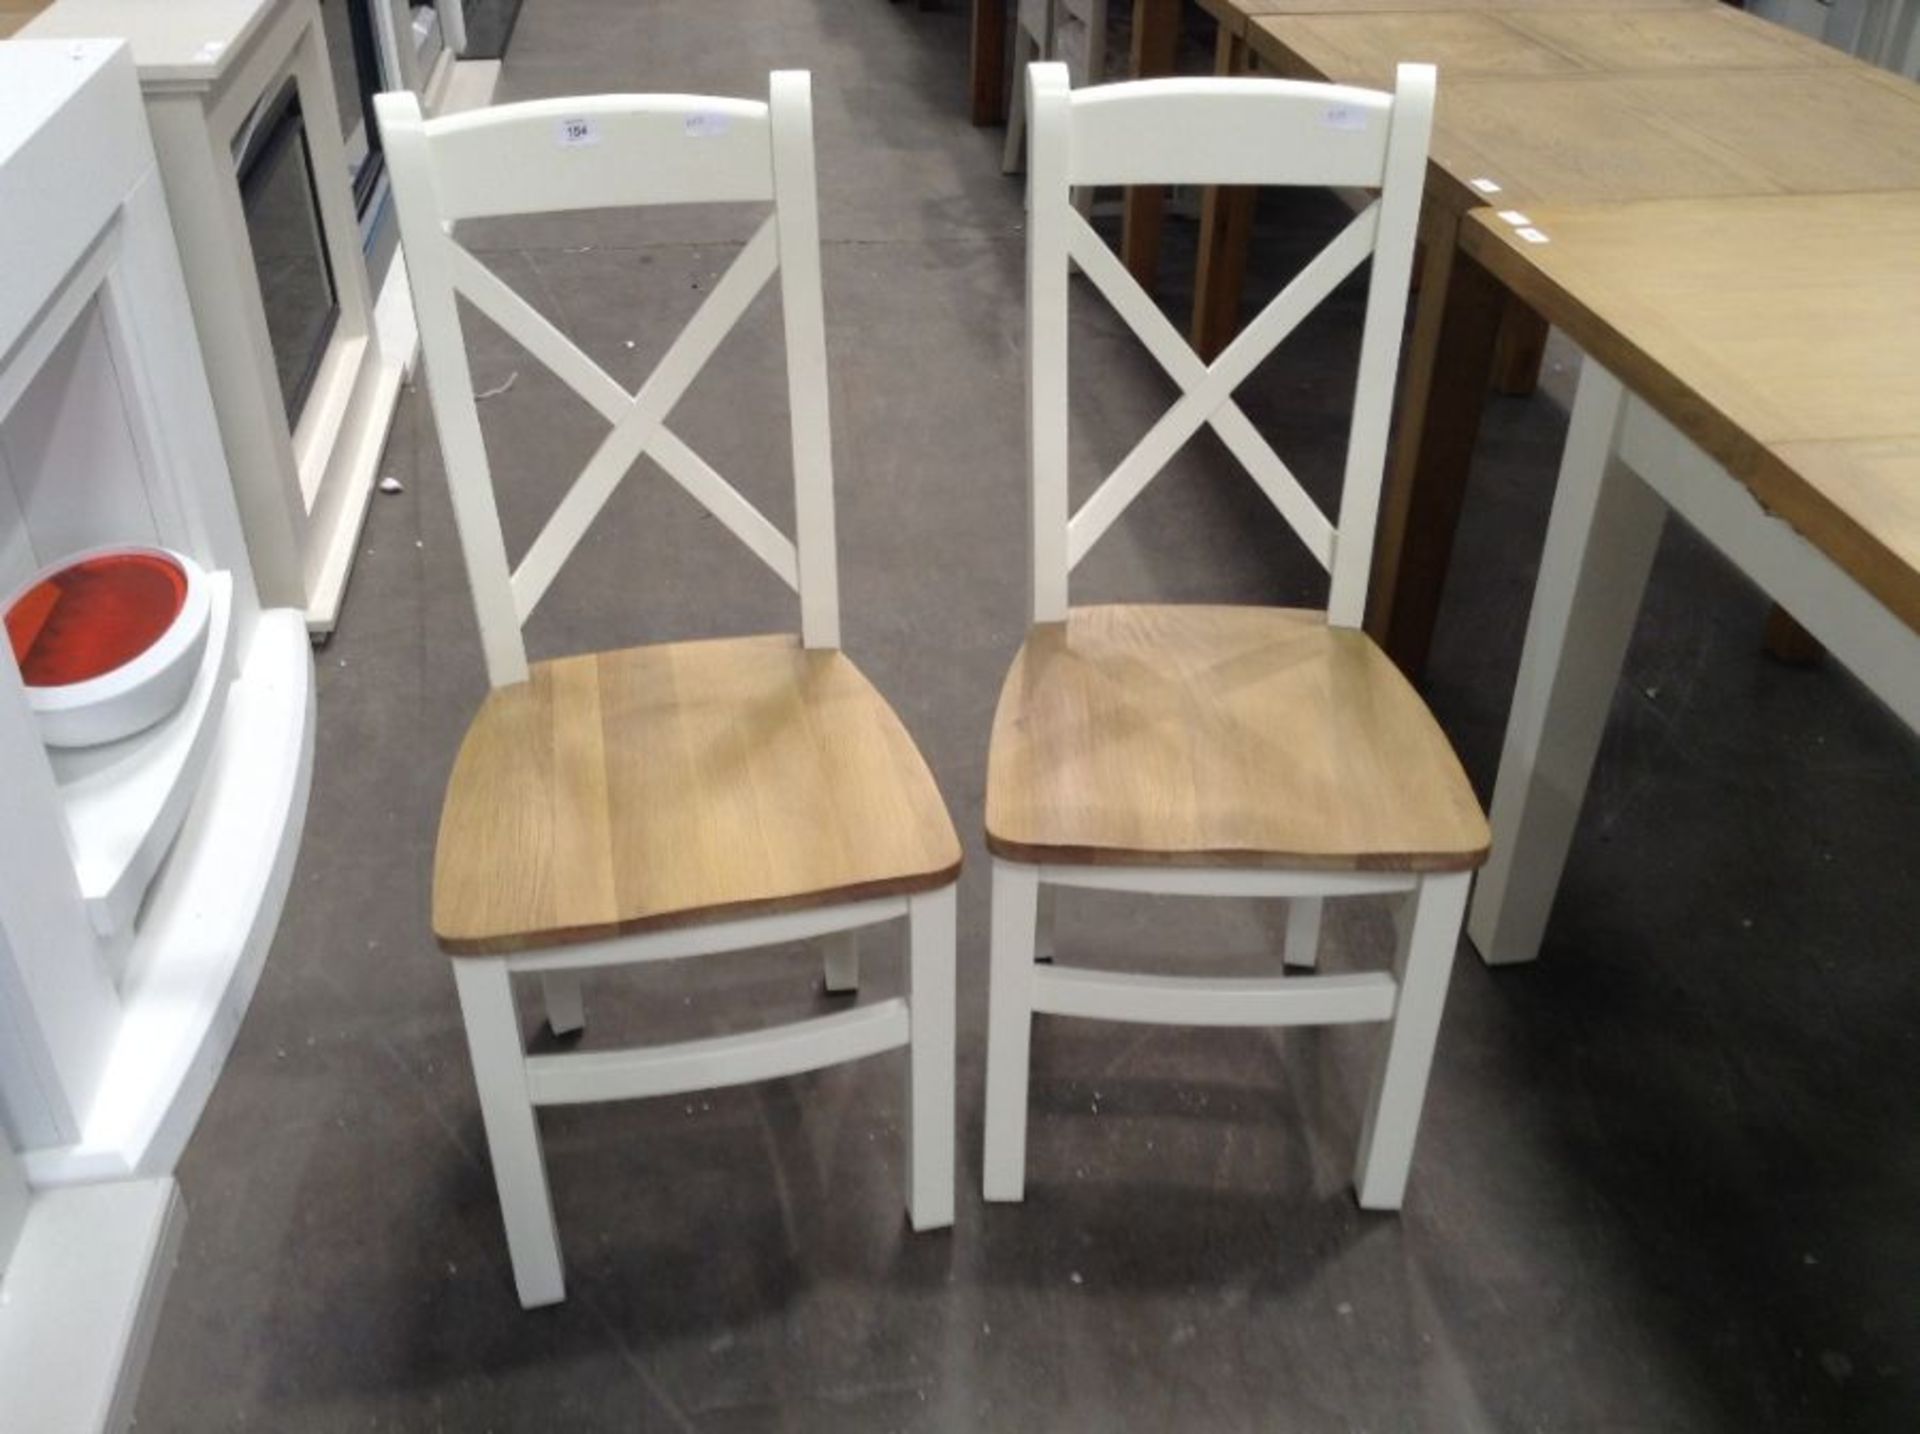 Suffolk White Painted Oak Crossback Chair With Wooden Seat X 2 (MARKED) (A123 -TT-CBCW-W)(A124 -TT-